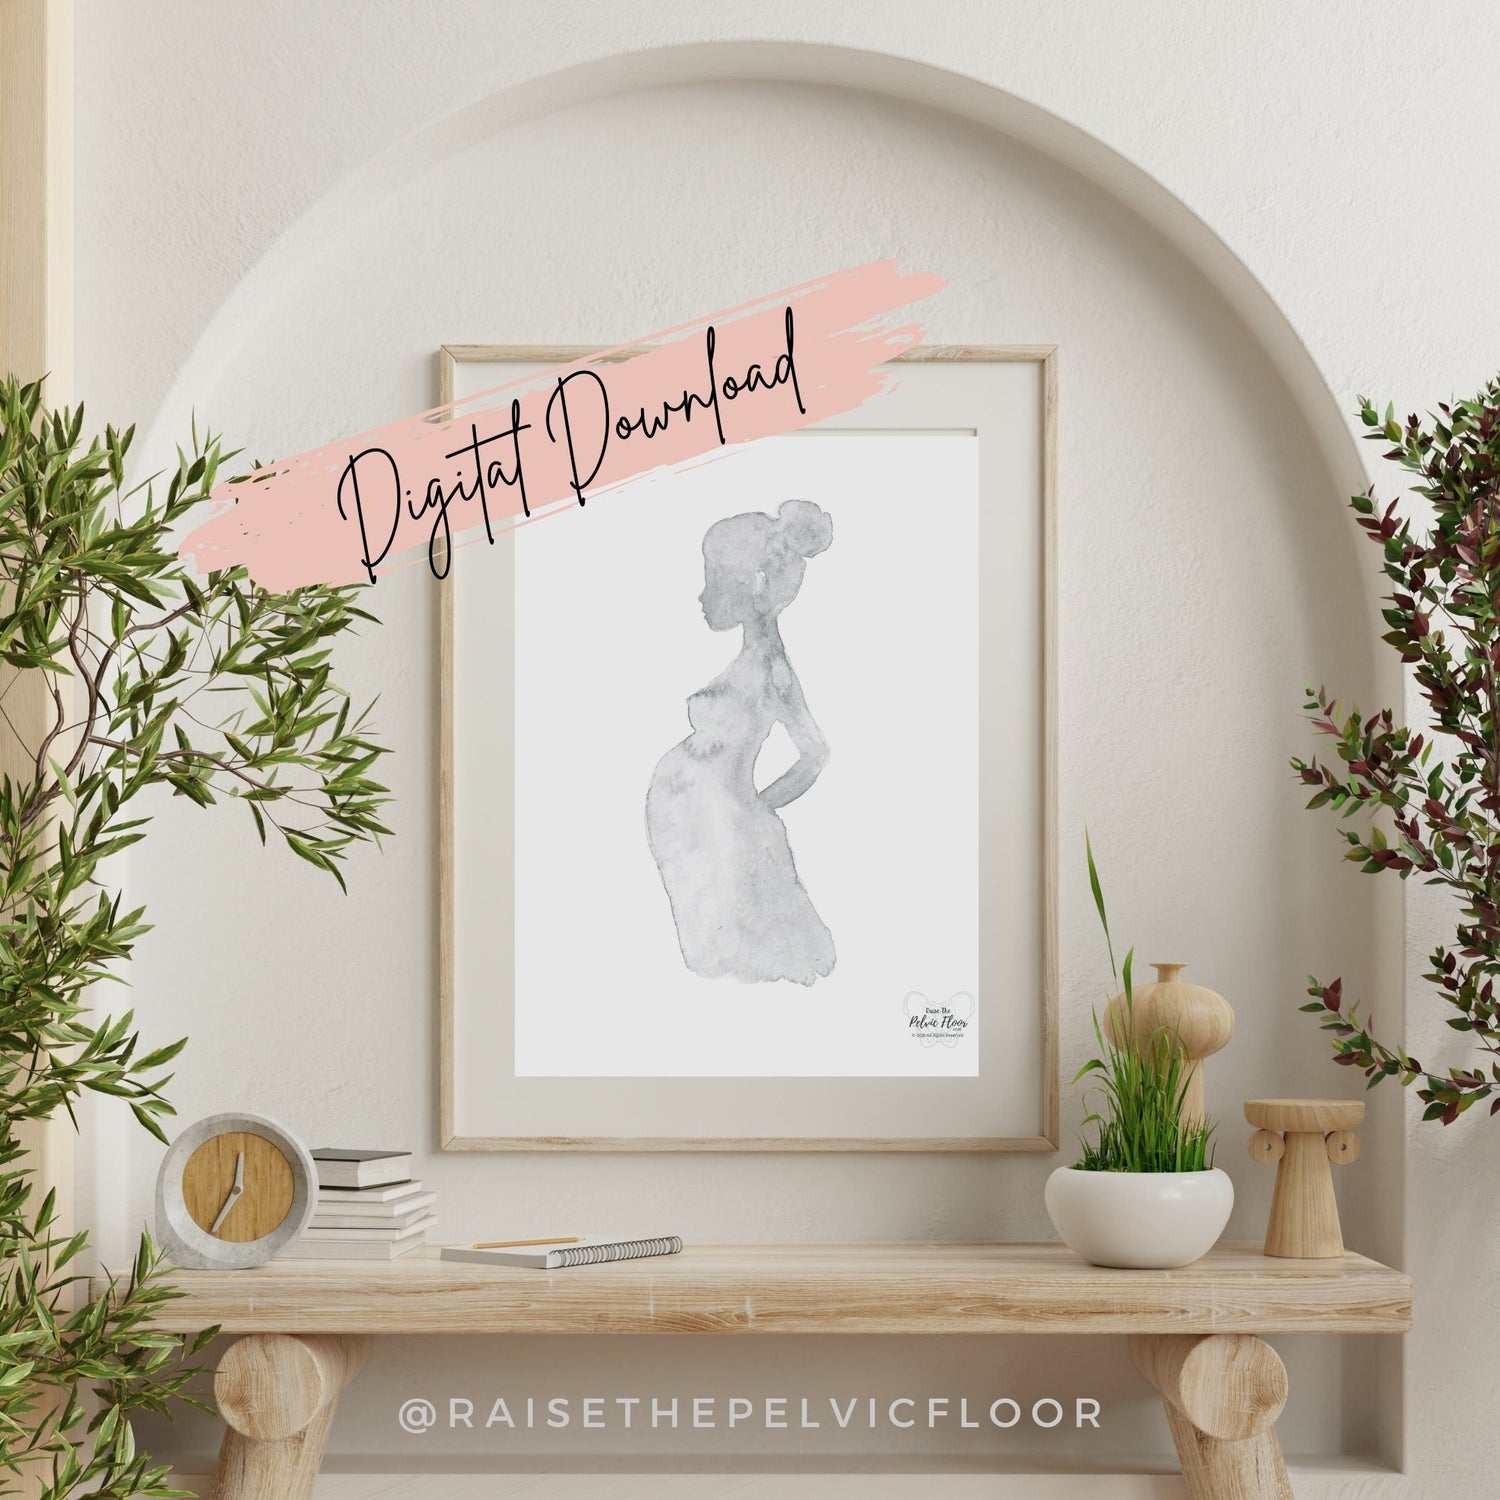 Pregnant Watercolor Art | Simple Maternity Outline Poster | Baby Shower, doula, Pelvic Floor Therapist, Chiropractor * Digital Download*